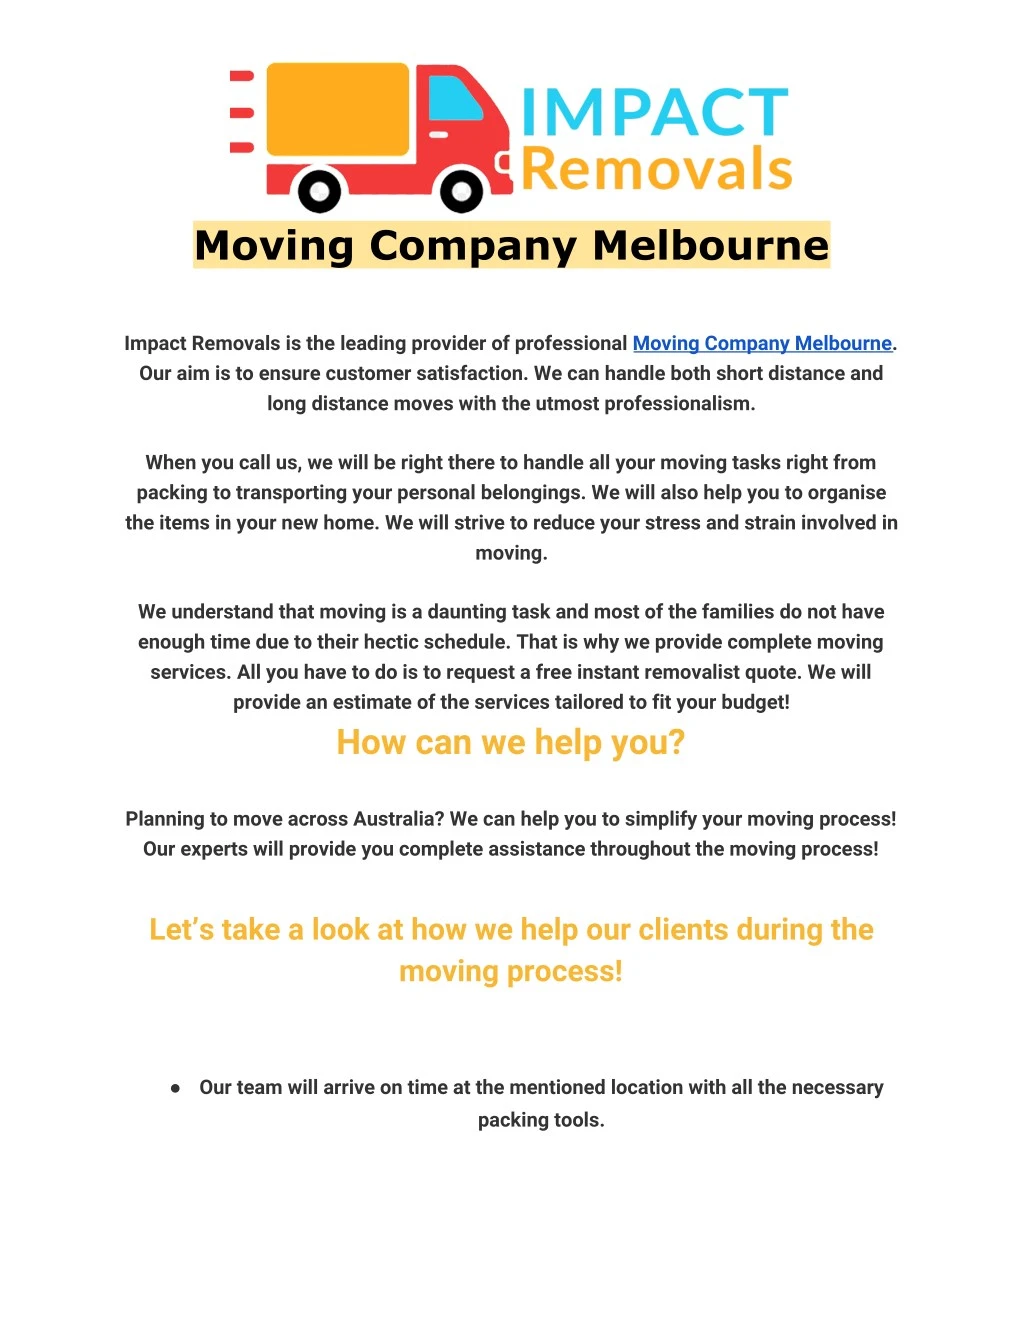 moving company melbourne impact removals